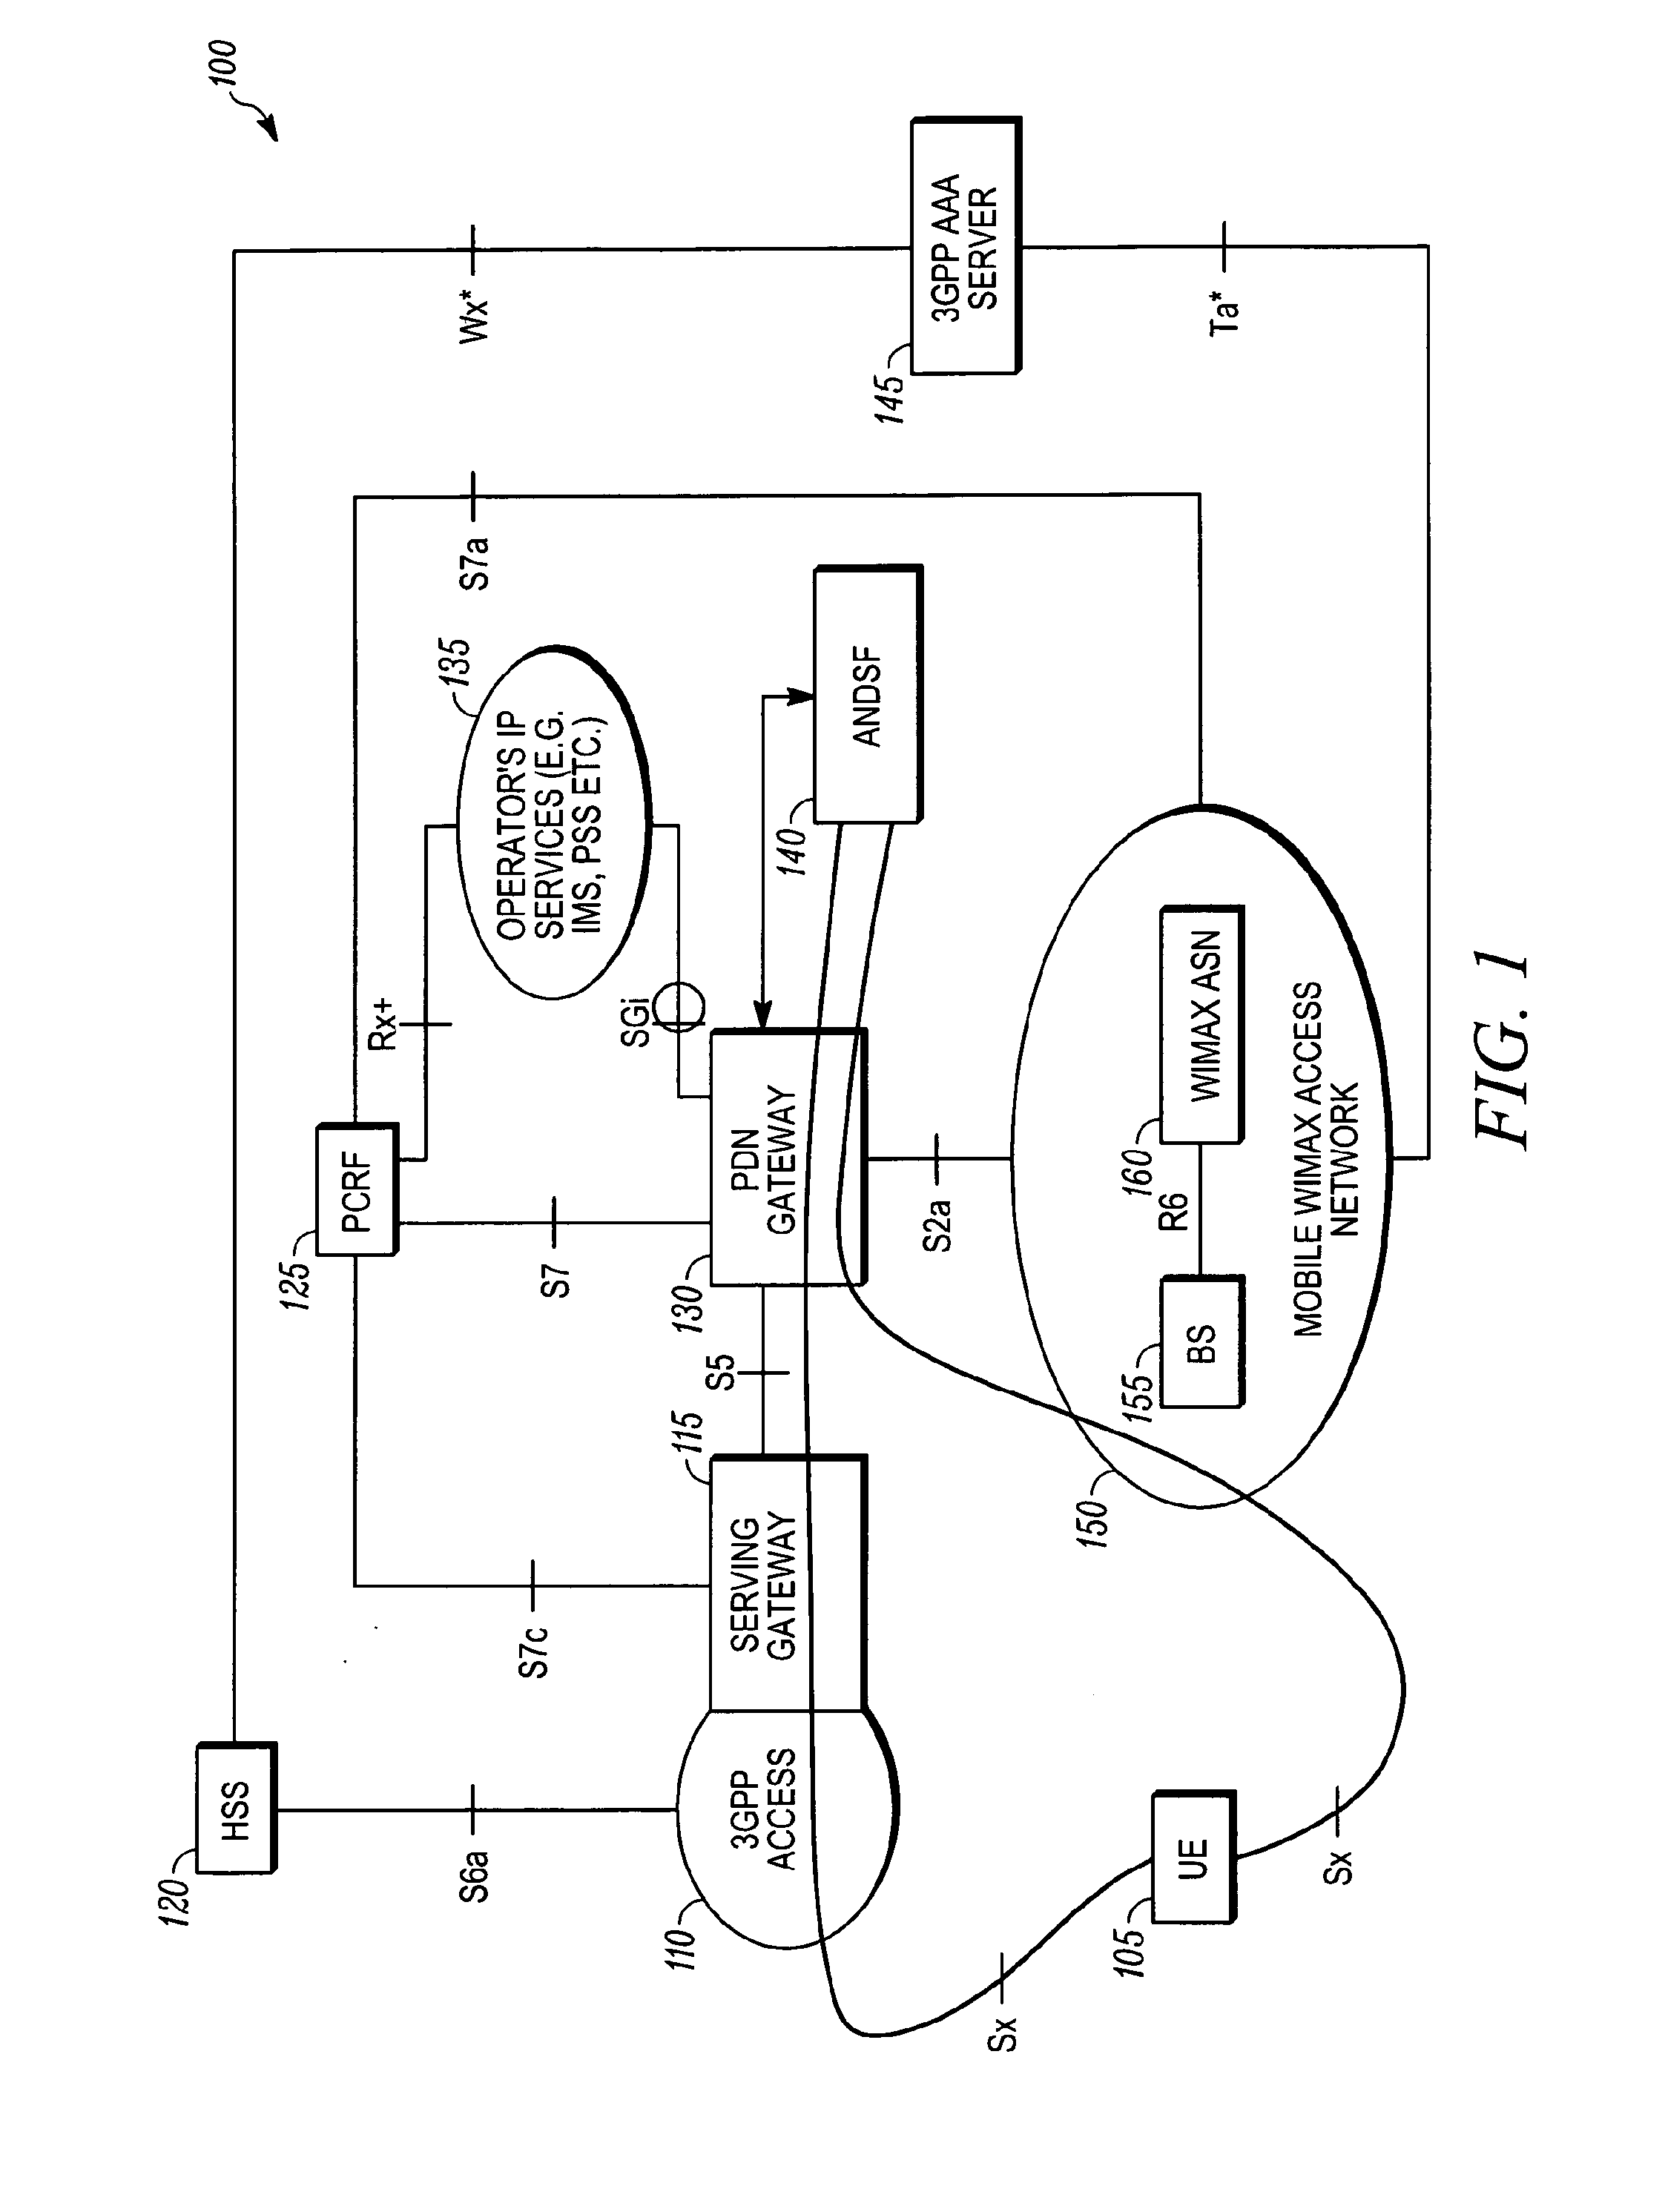 Access network discovery and selection in a multi-access technology cellular communication system